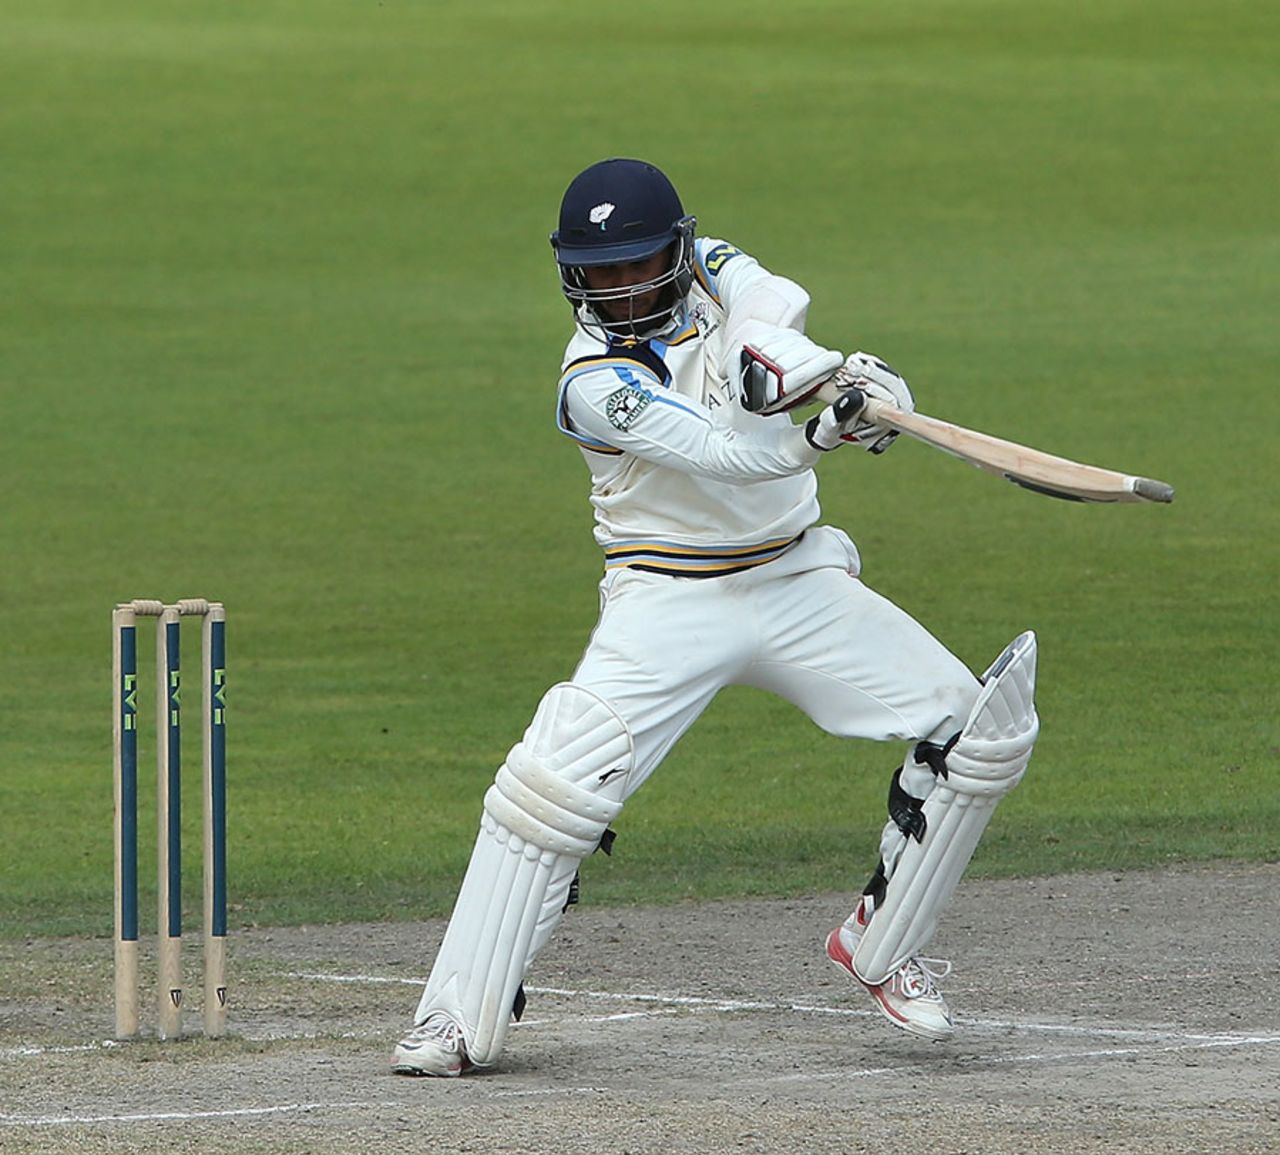 Adil Rashid helped himself to a century of his own, Lancashire v Yorkshire, County Championship Division One, Old Trafford, 3rd day, September 2, 2014